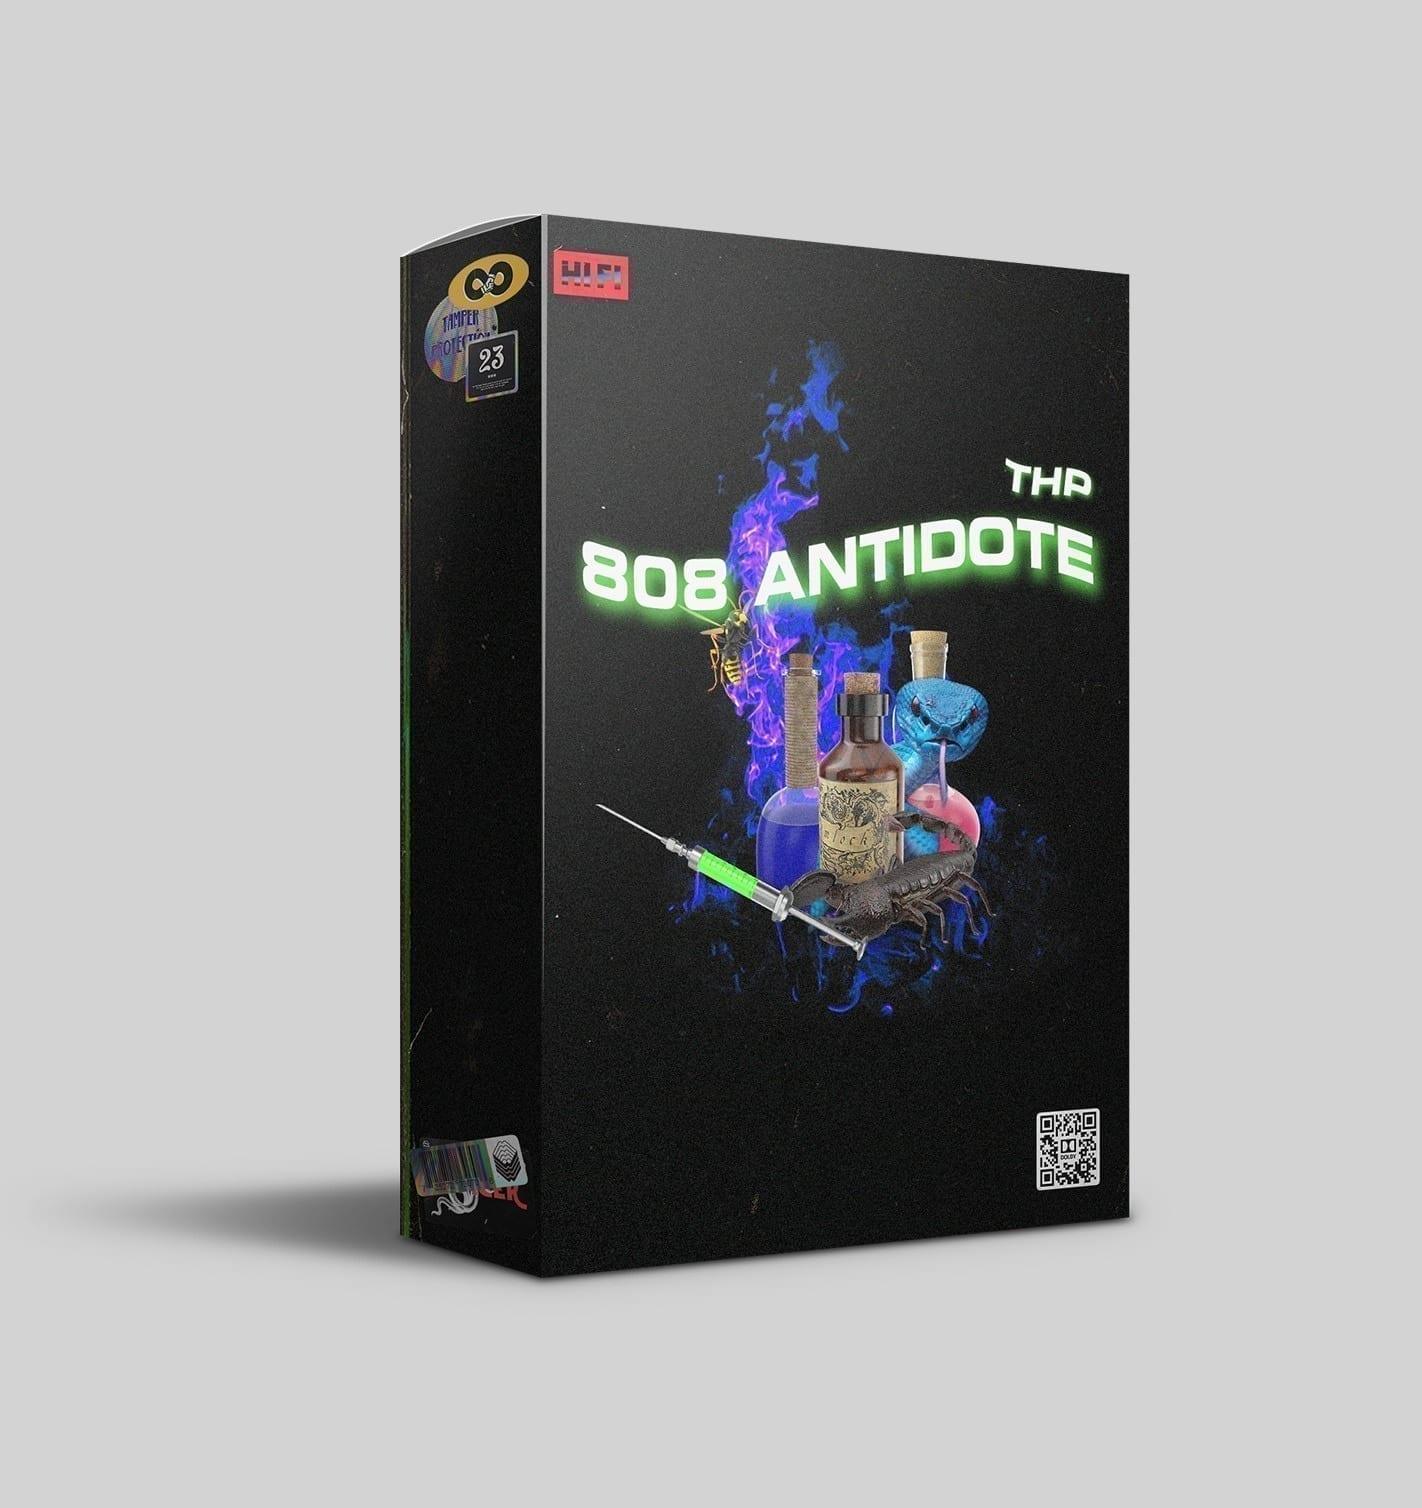 THP - 808 Antidote (Serum Presets) - The Highest Producers